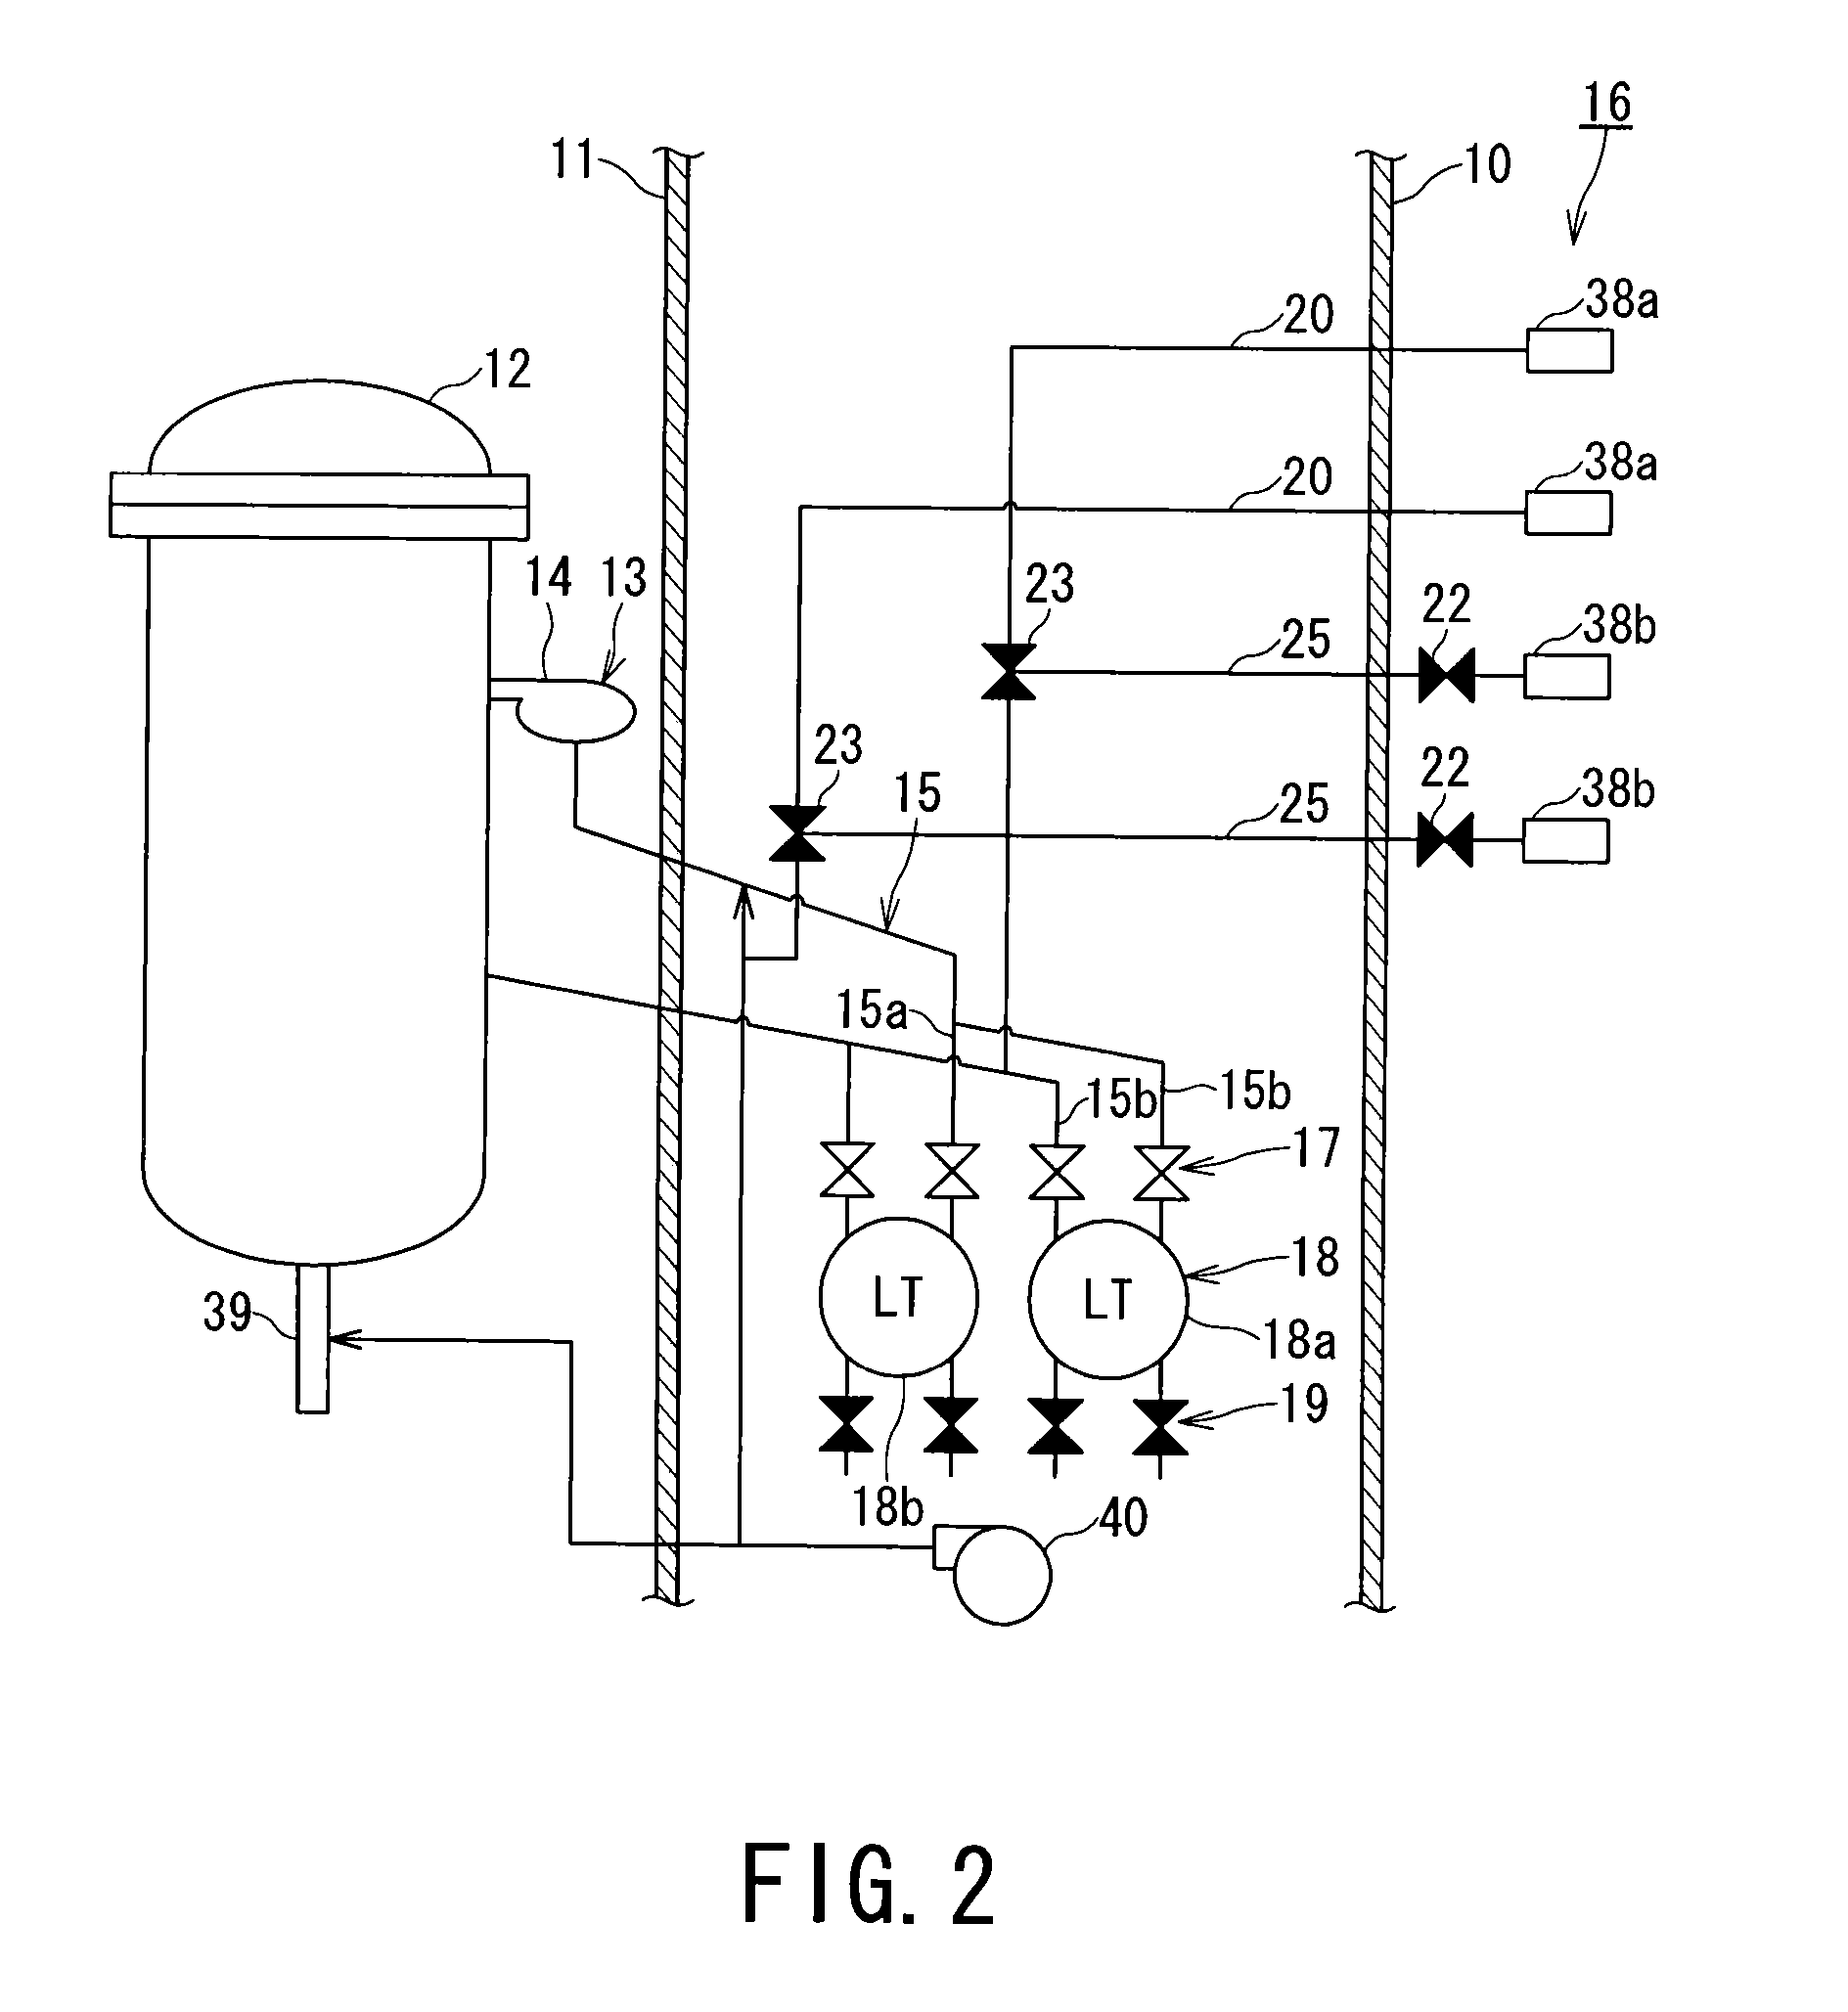 Water filling system for reactor water level gauge